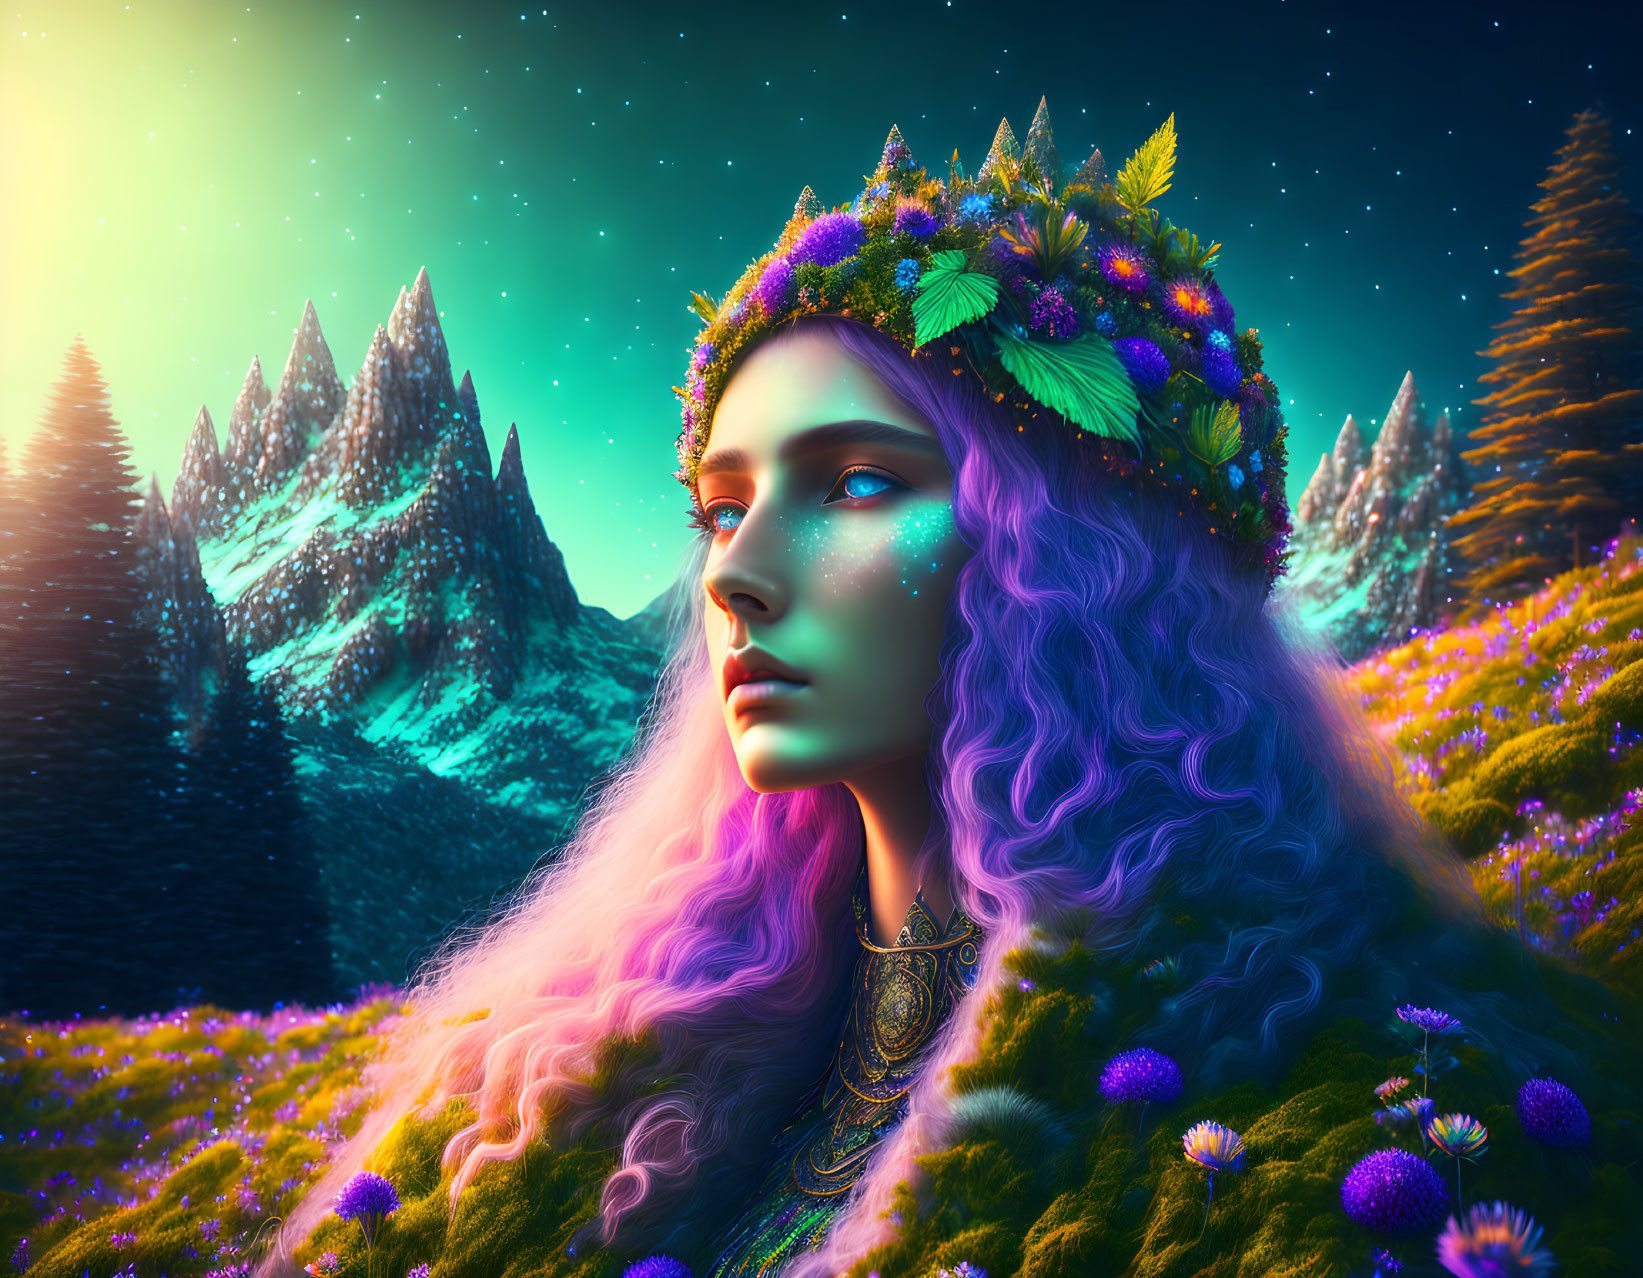 Fantasy portrait of woman with purple hair in floral crown against vivid starry landscape